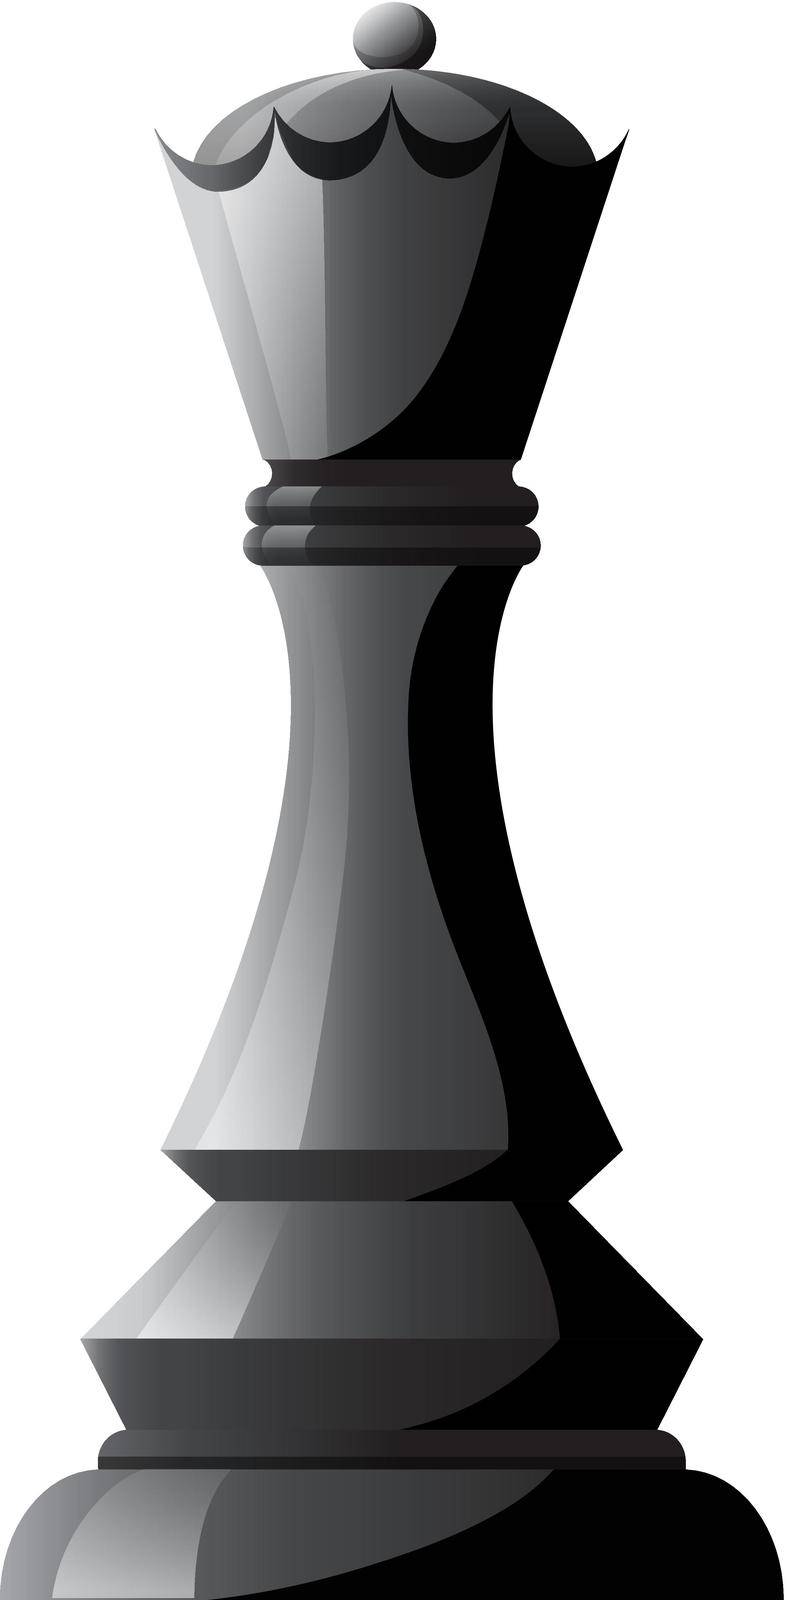 Chess piece by iimages